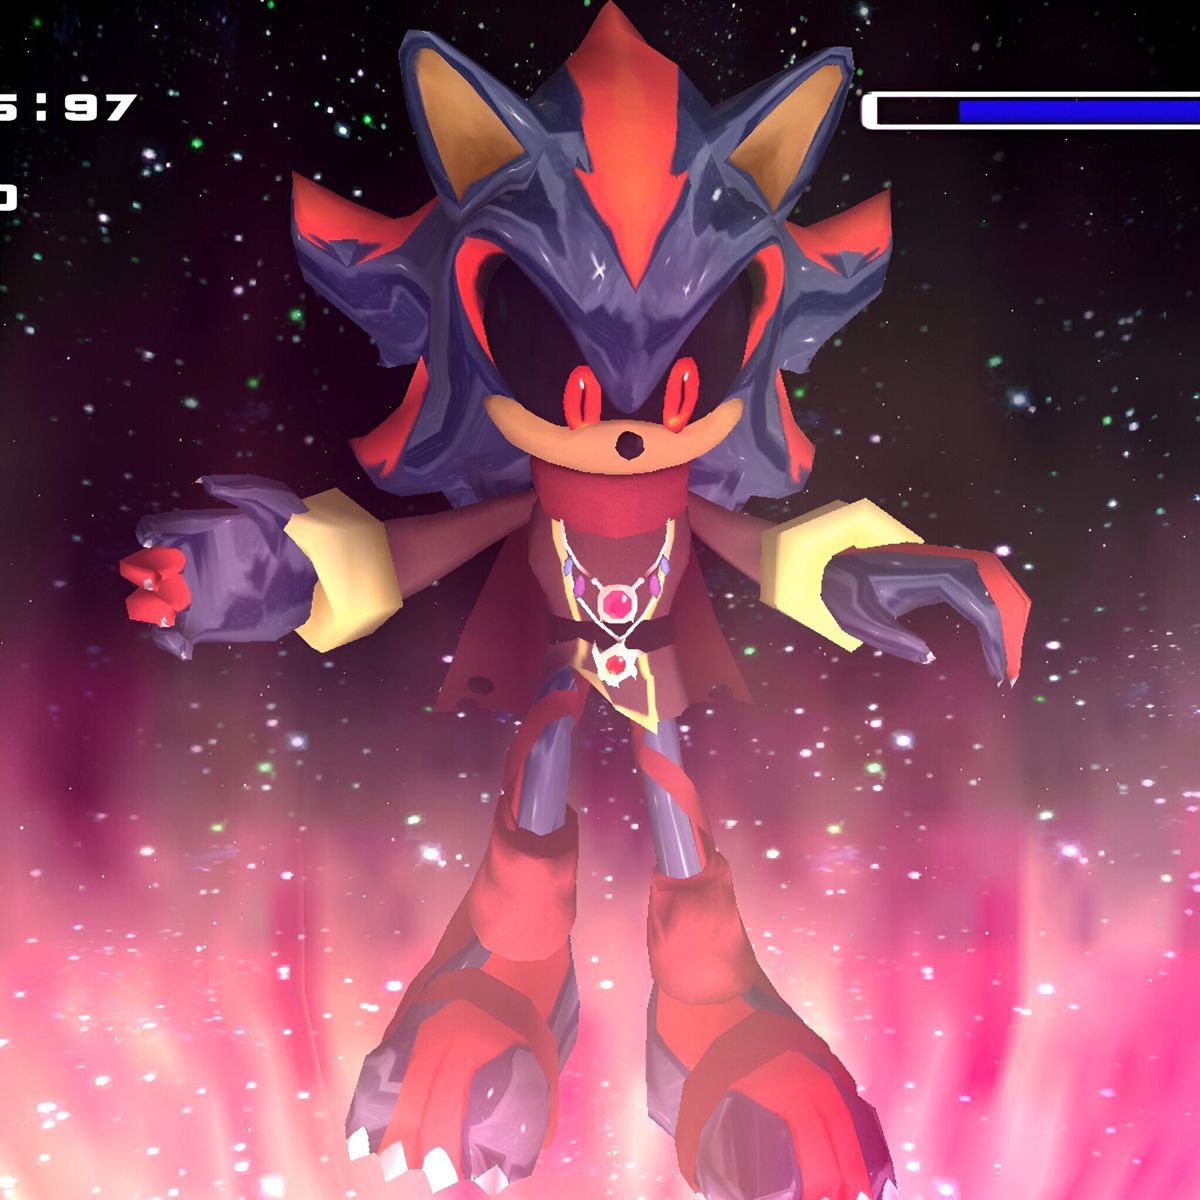 Shadow the Hedgehog in his final form - Sonic